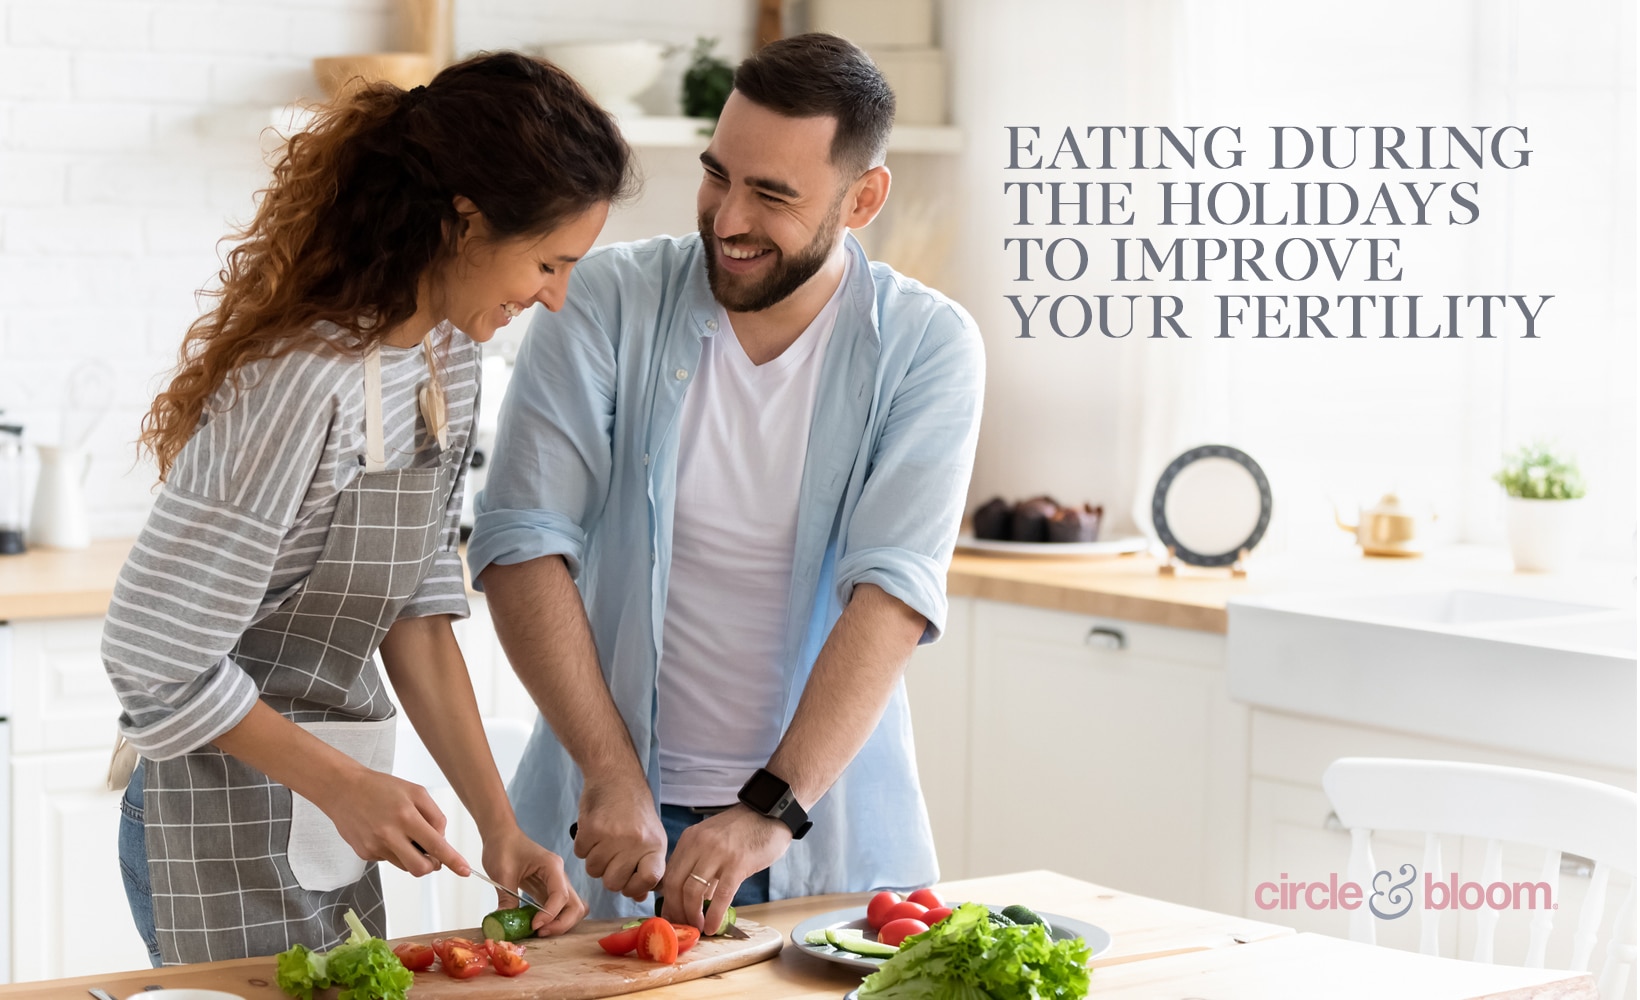 How To Eat During The Holidays To Improve Your Fertility